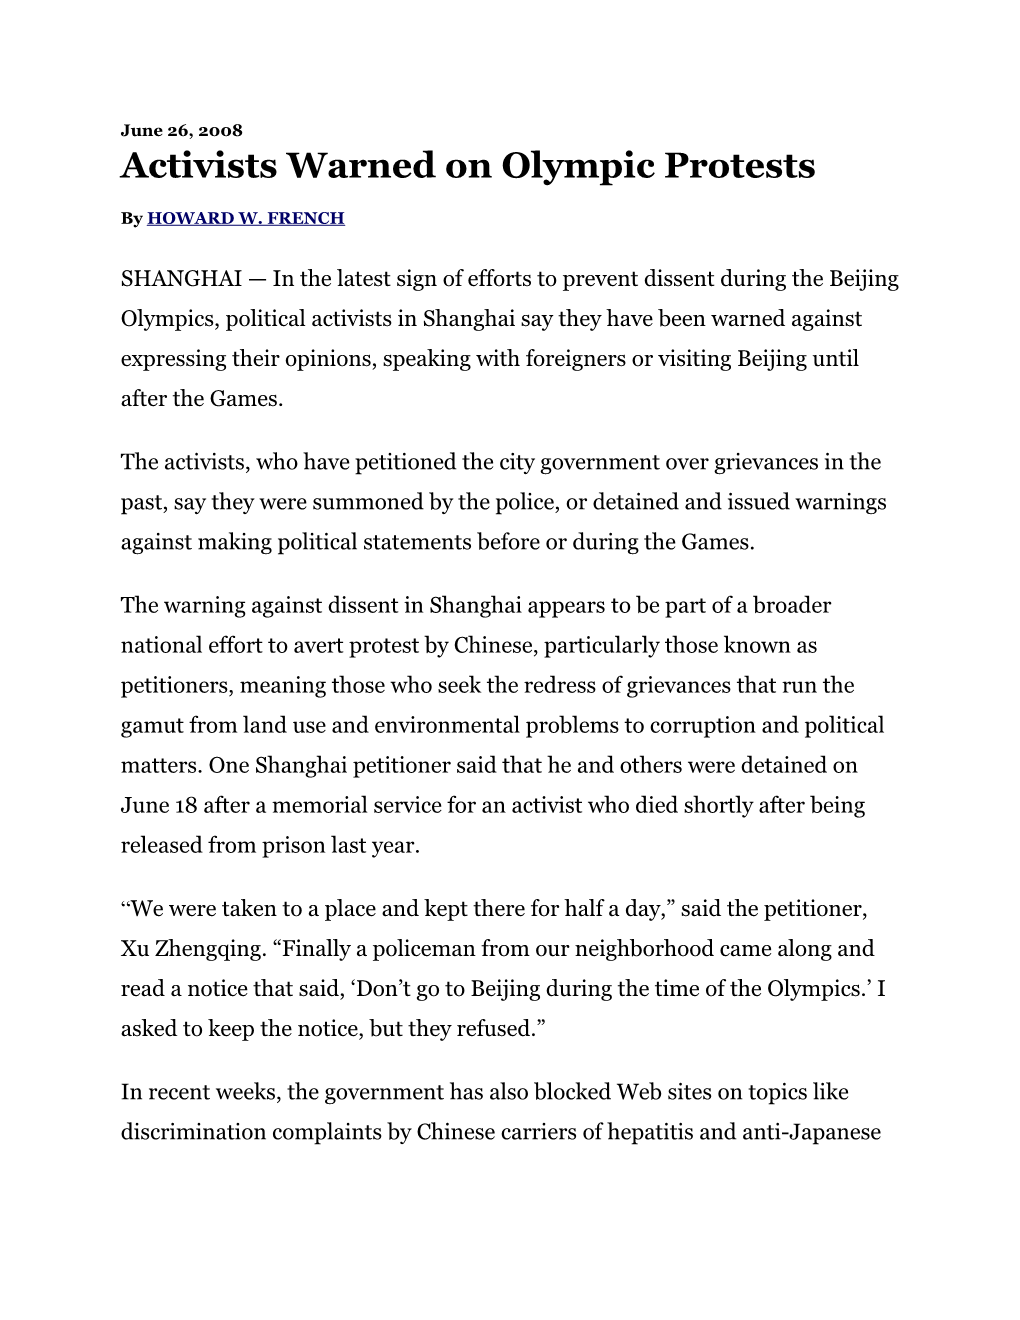 Activists Warned on Olympic Protests